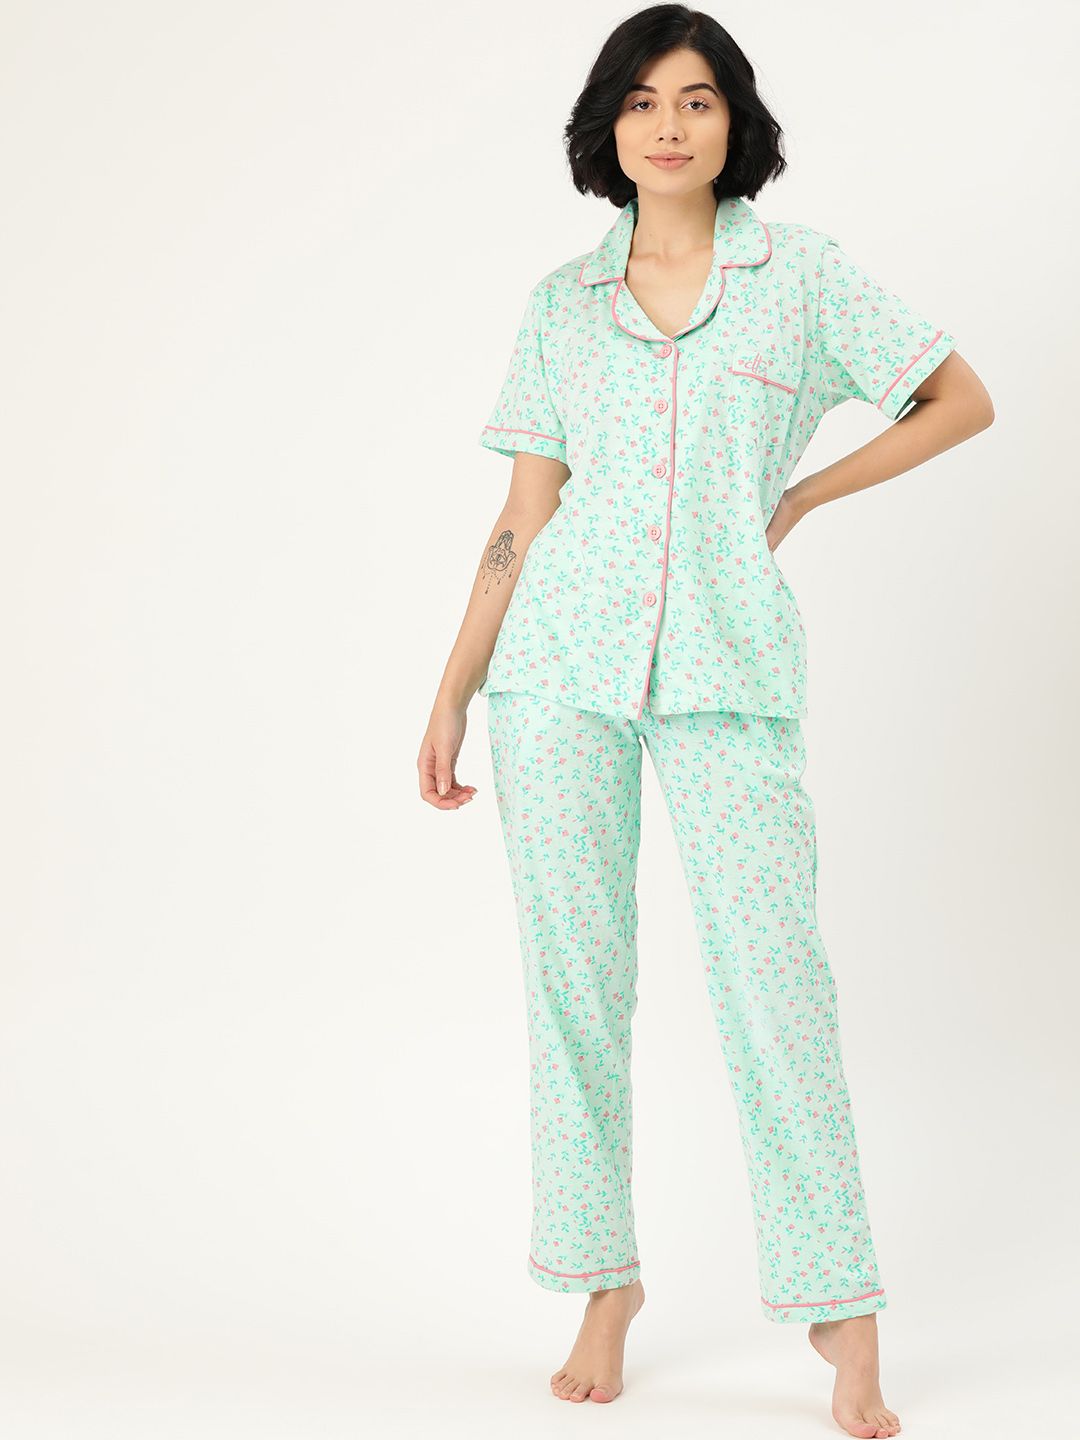 Clt s Women Sea Green & Pink Printed Night suit Price in India